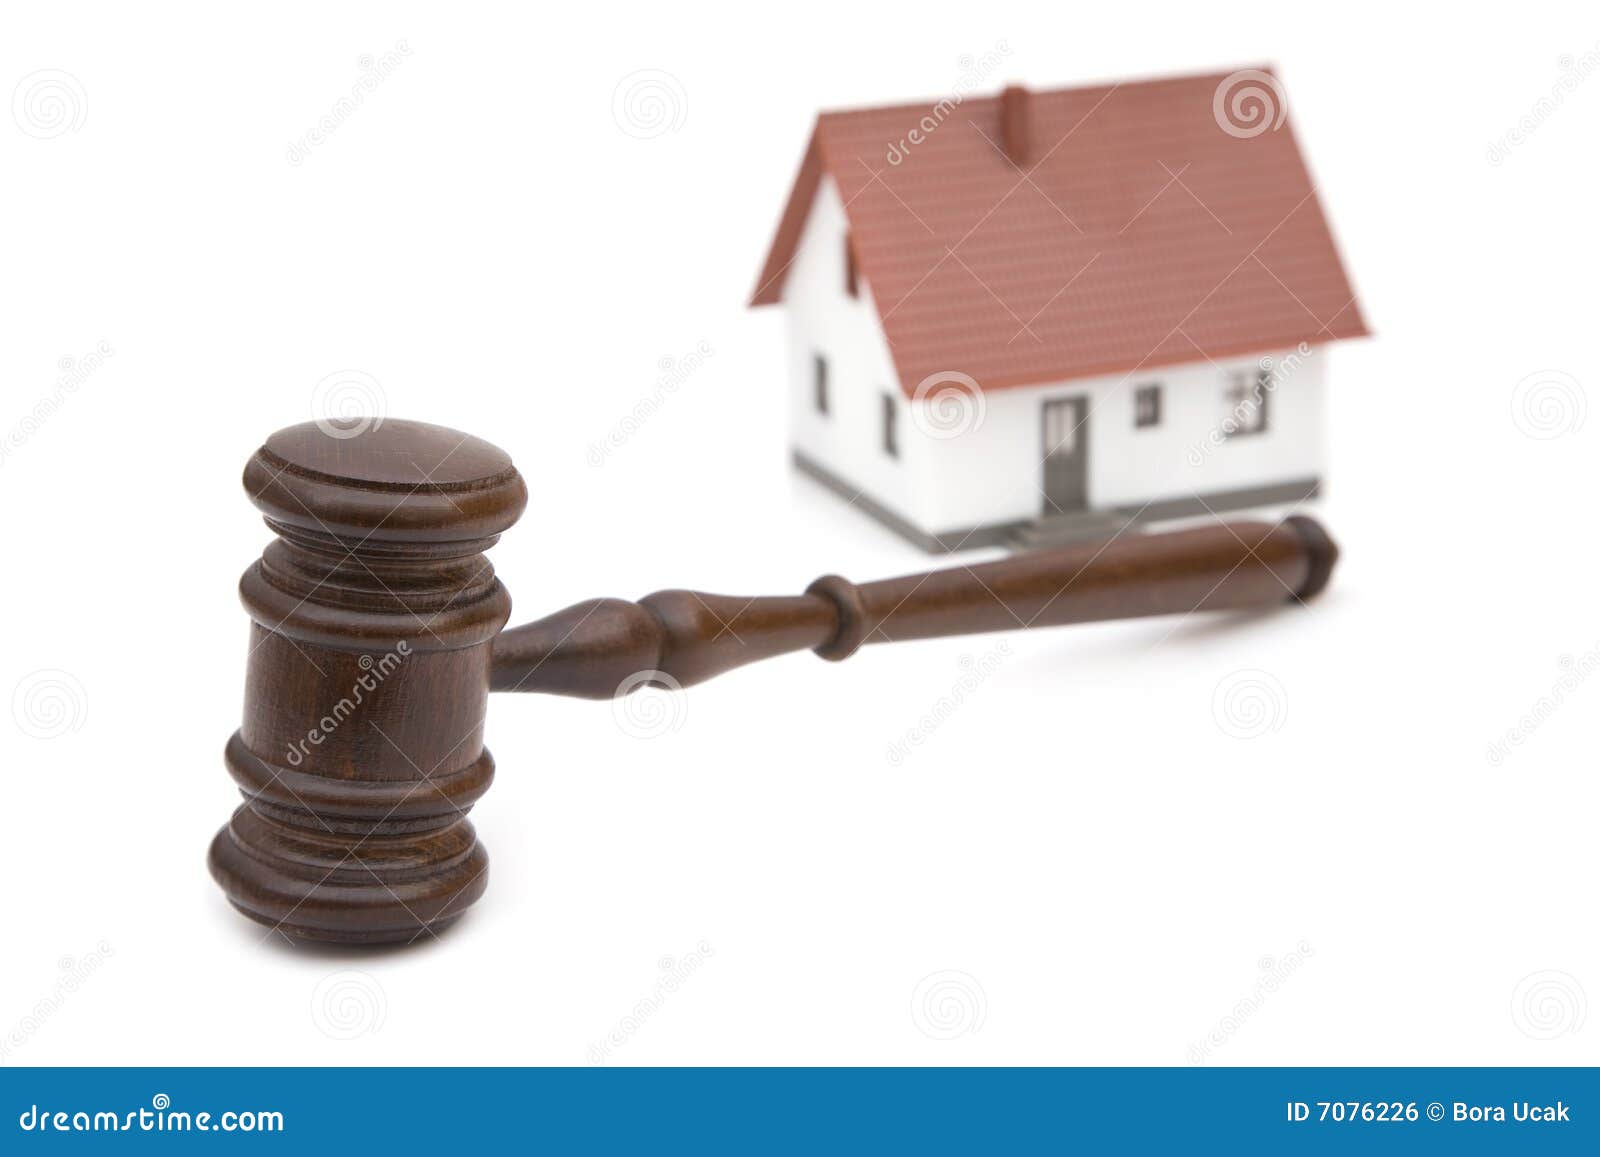 real estate and laws